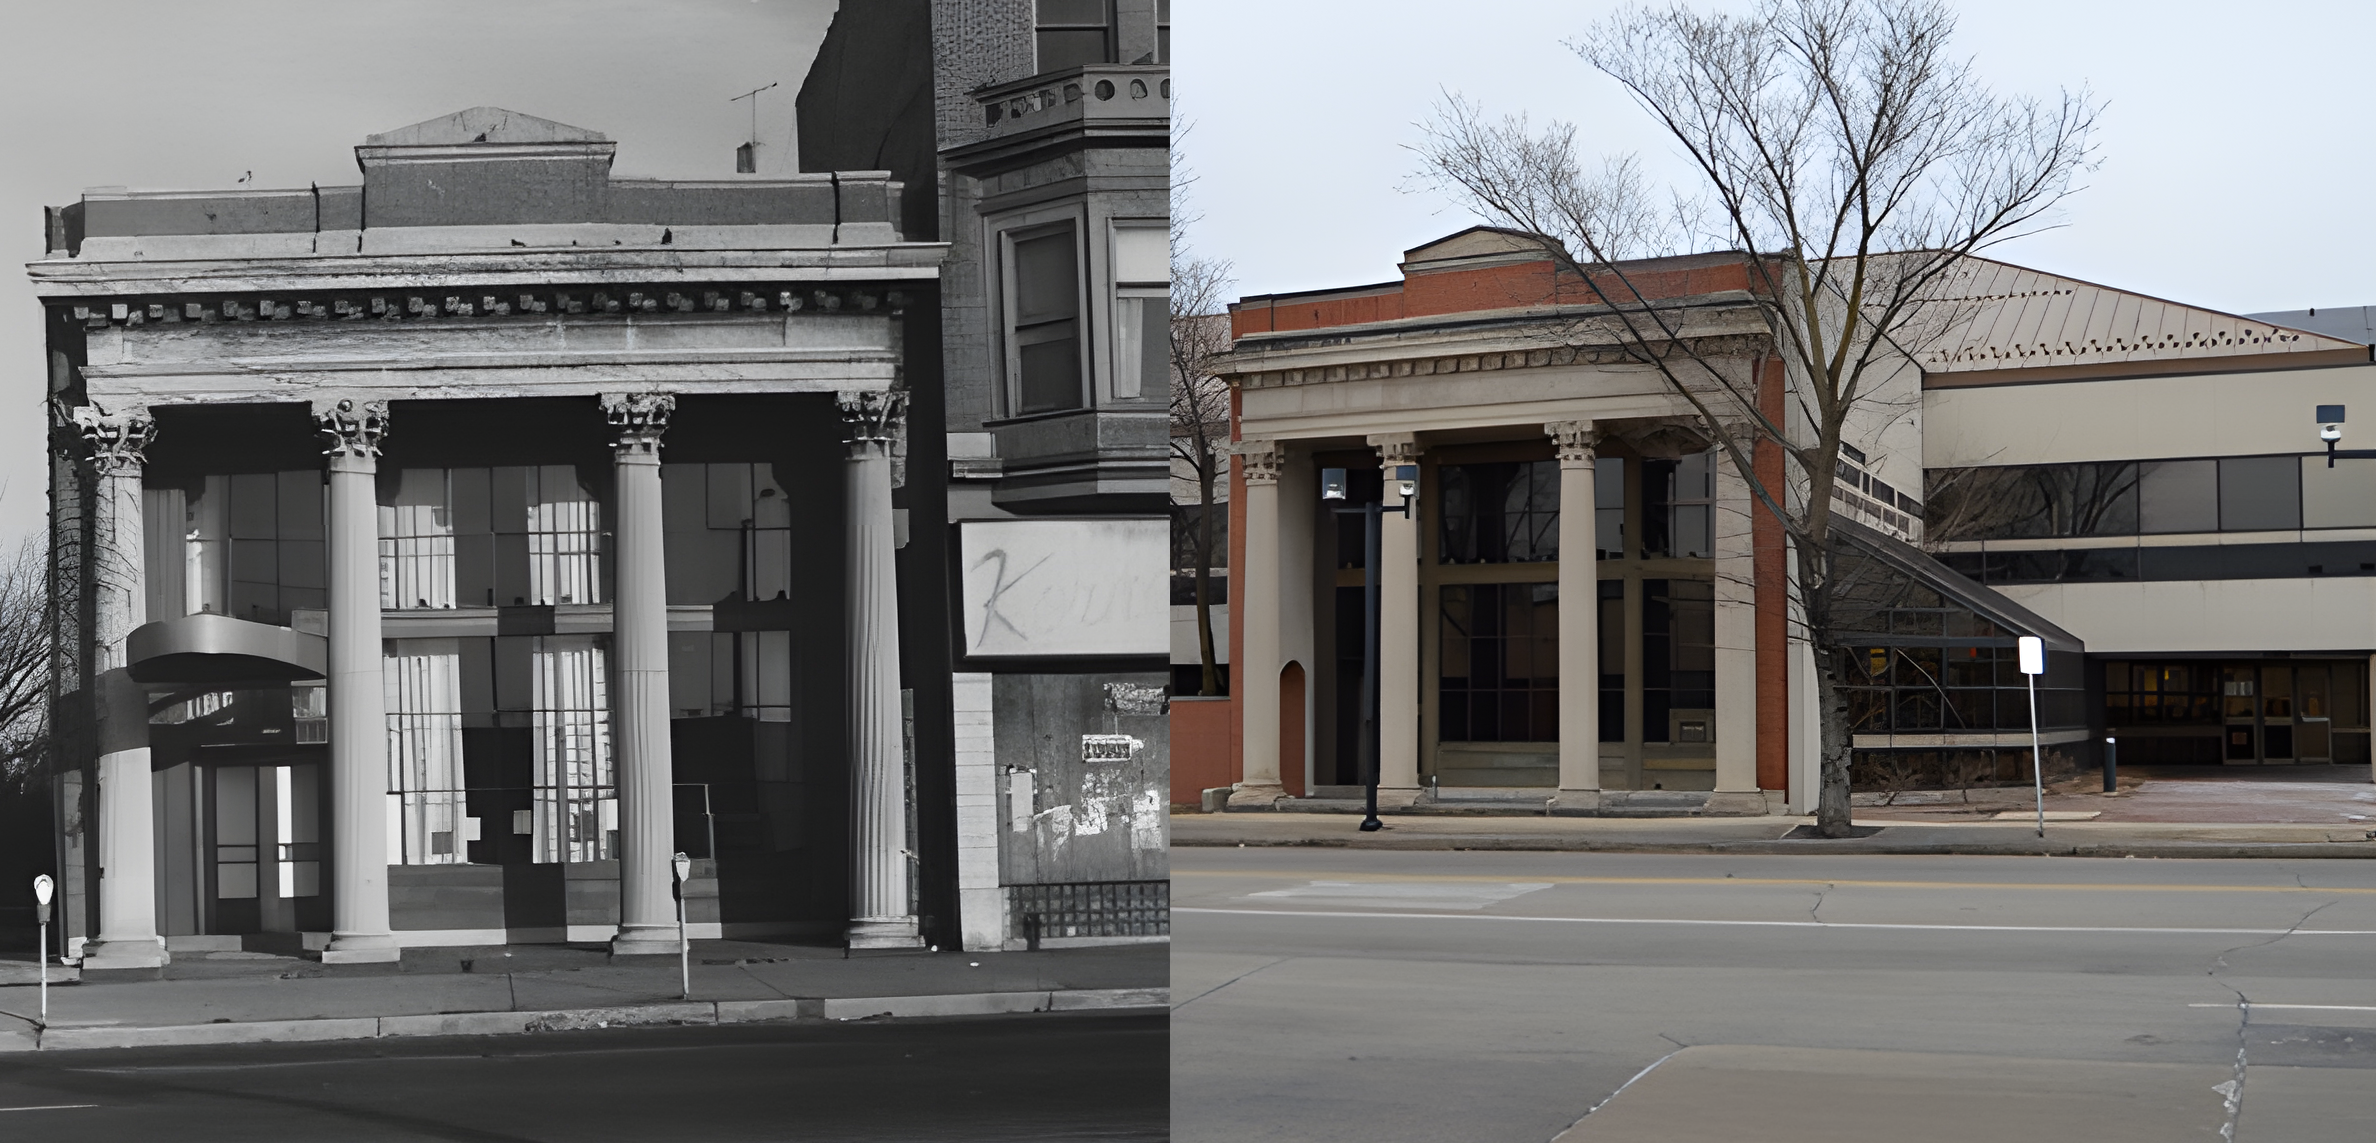 Combined picture showing the main facade early in the 20th century next to today.